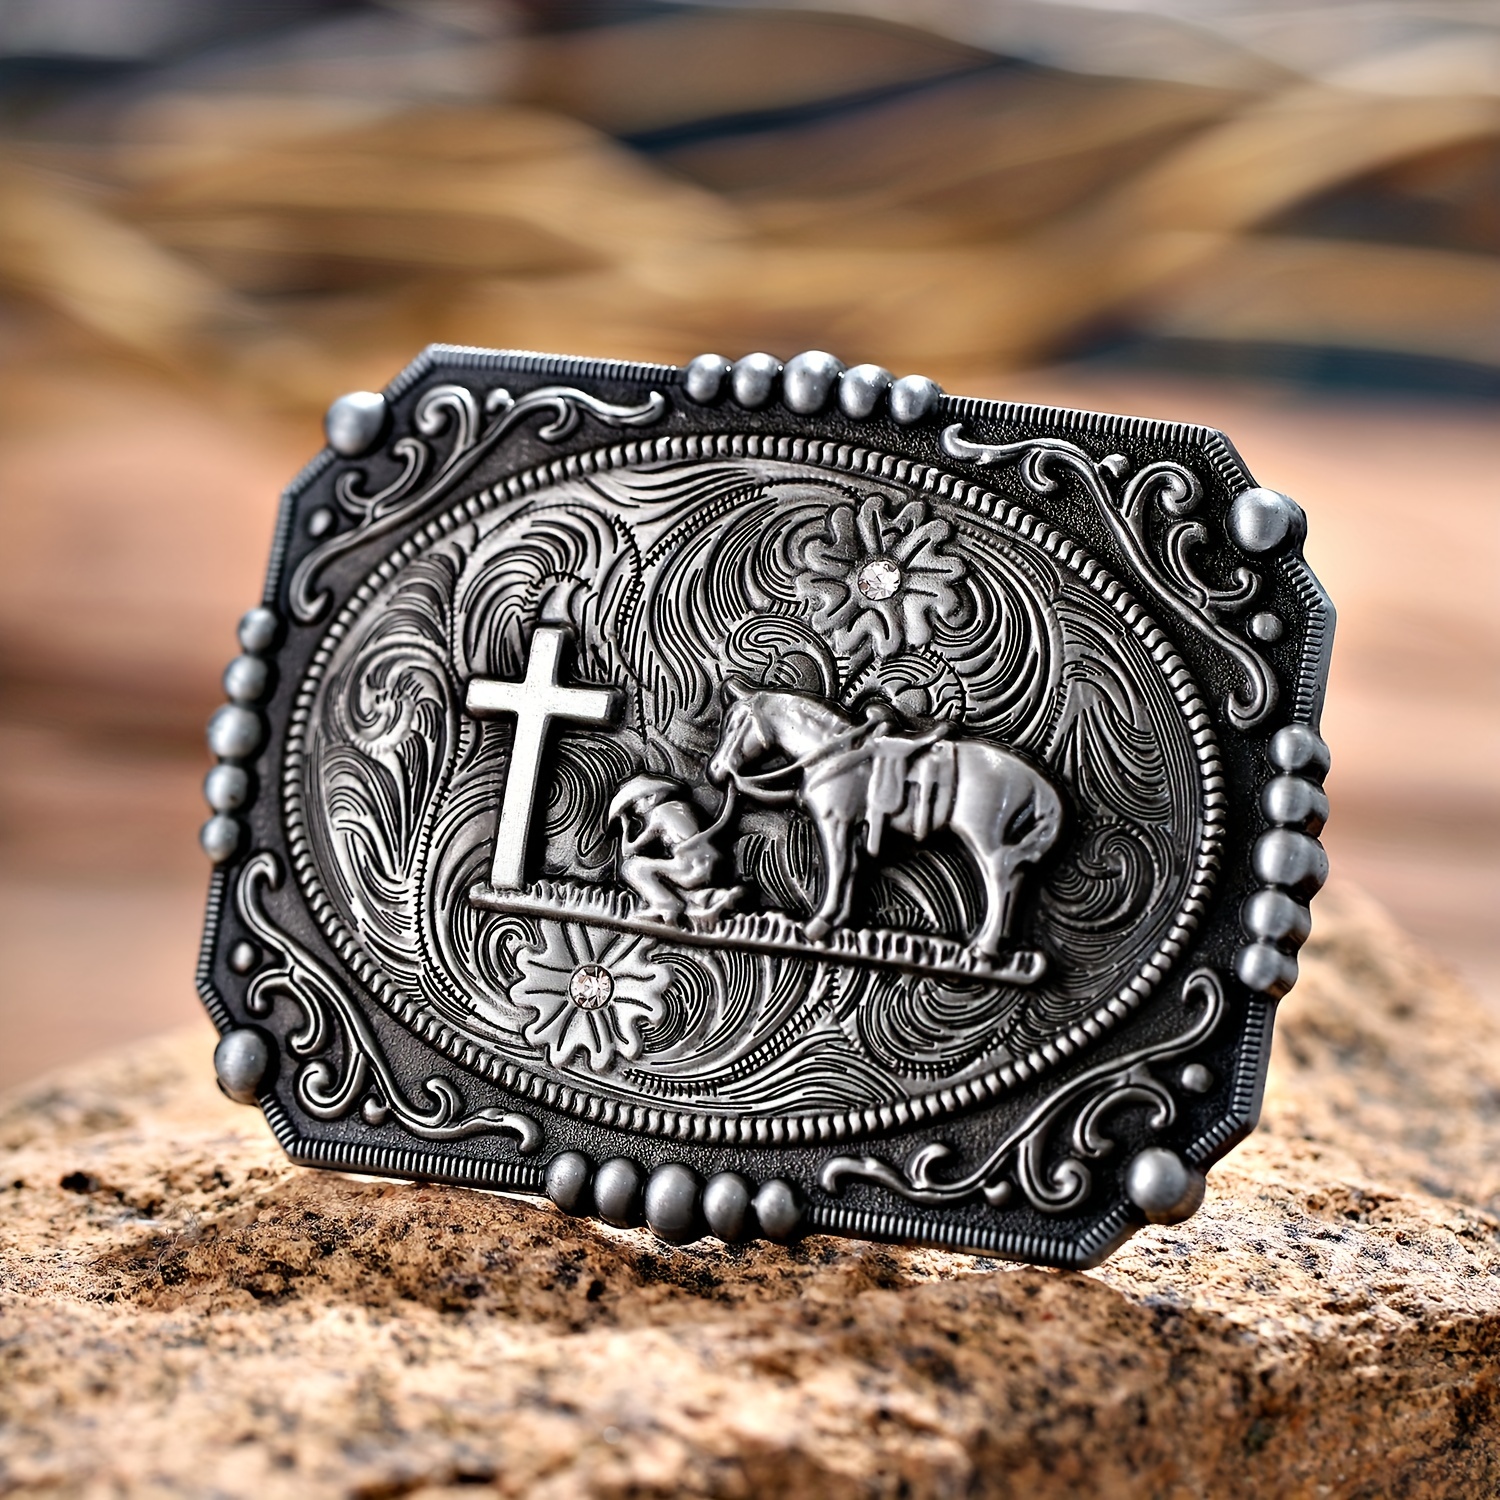 Vintage Western Cowboy Belt Buckle with Cross and Horse Design - Stylish  and Unique Fashion Accessory